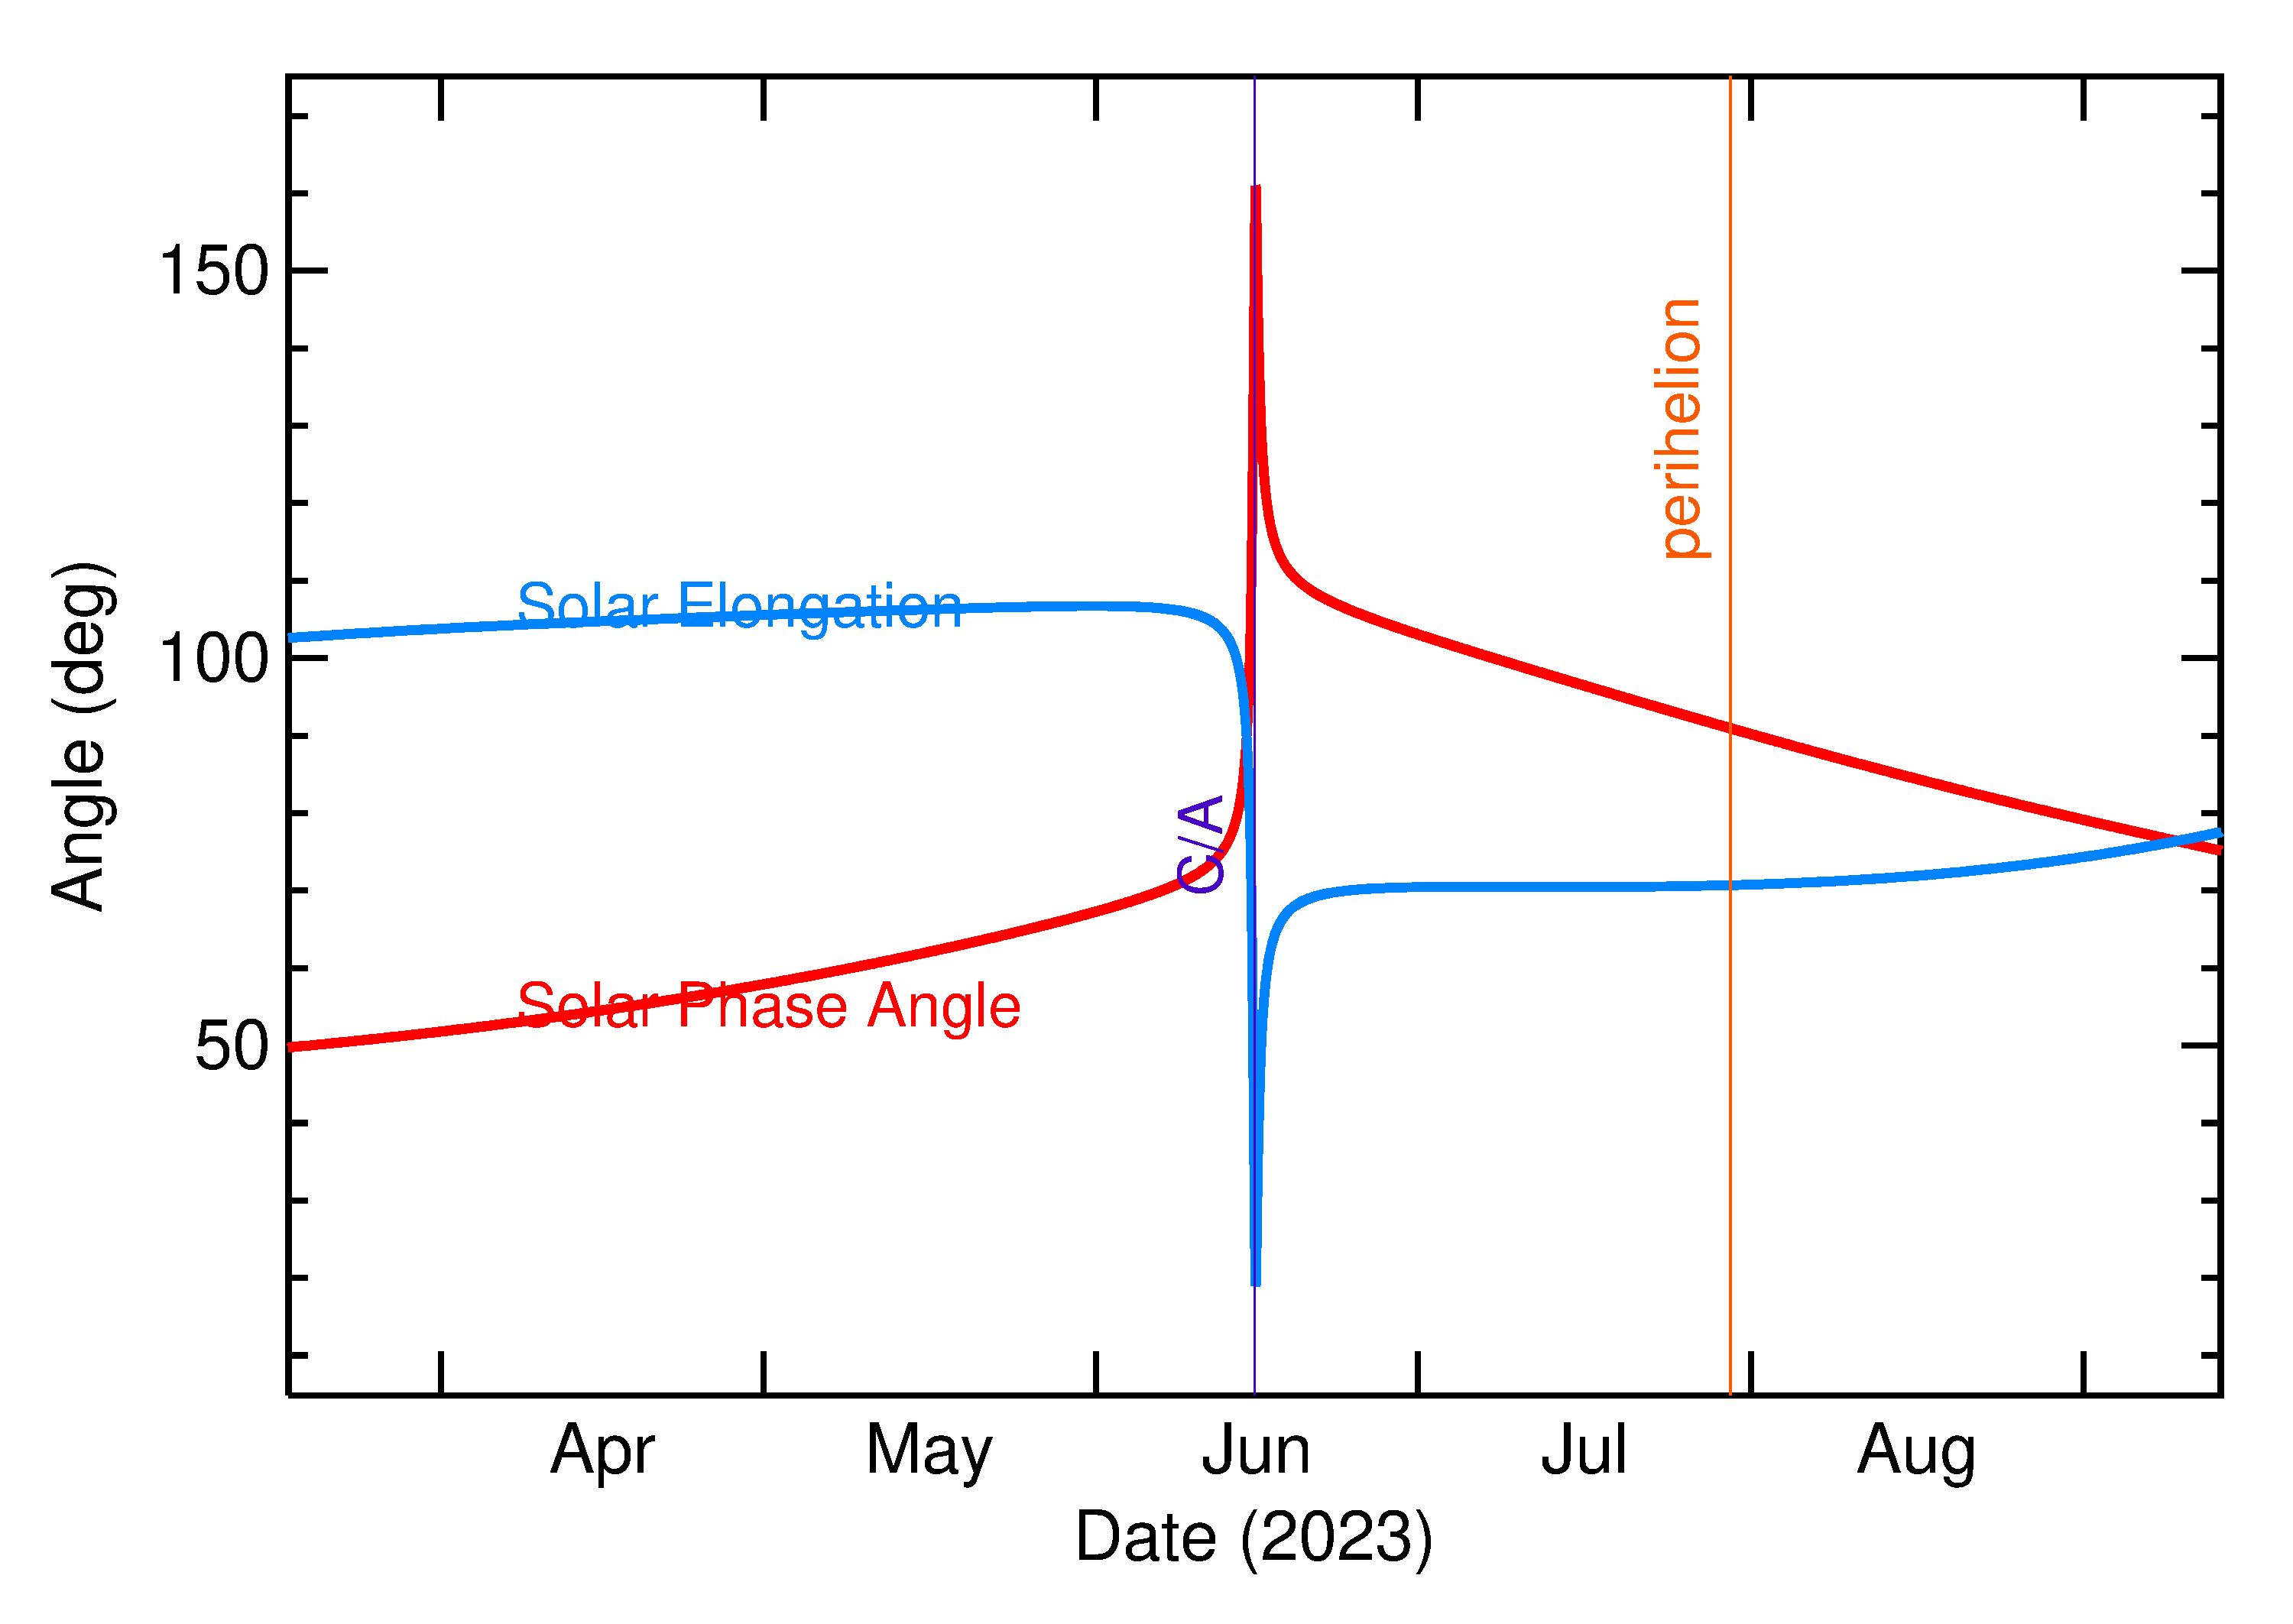 Solar Elongation and Solar Phase Angle of 2023 LZ in the months around closest approach